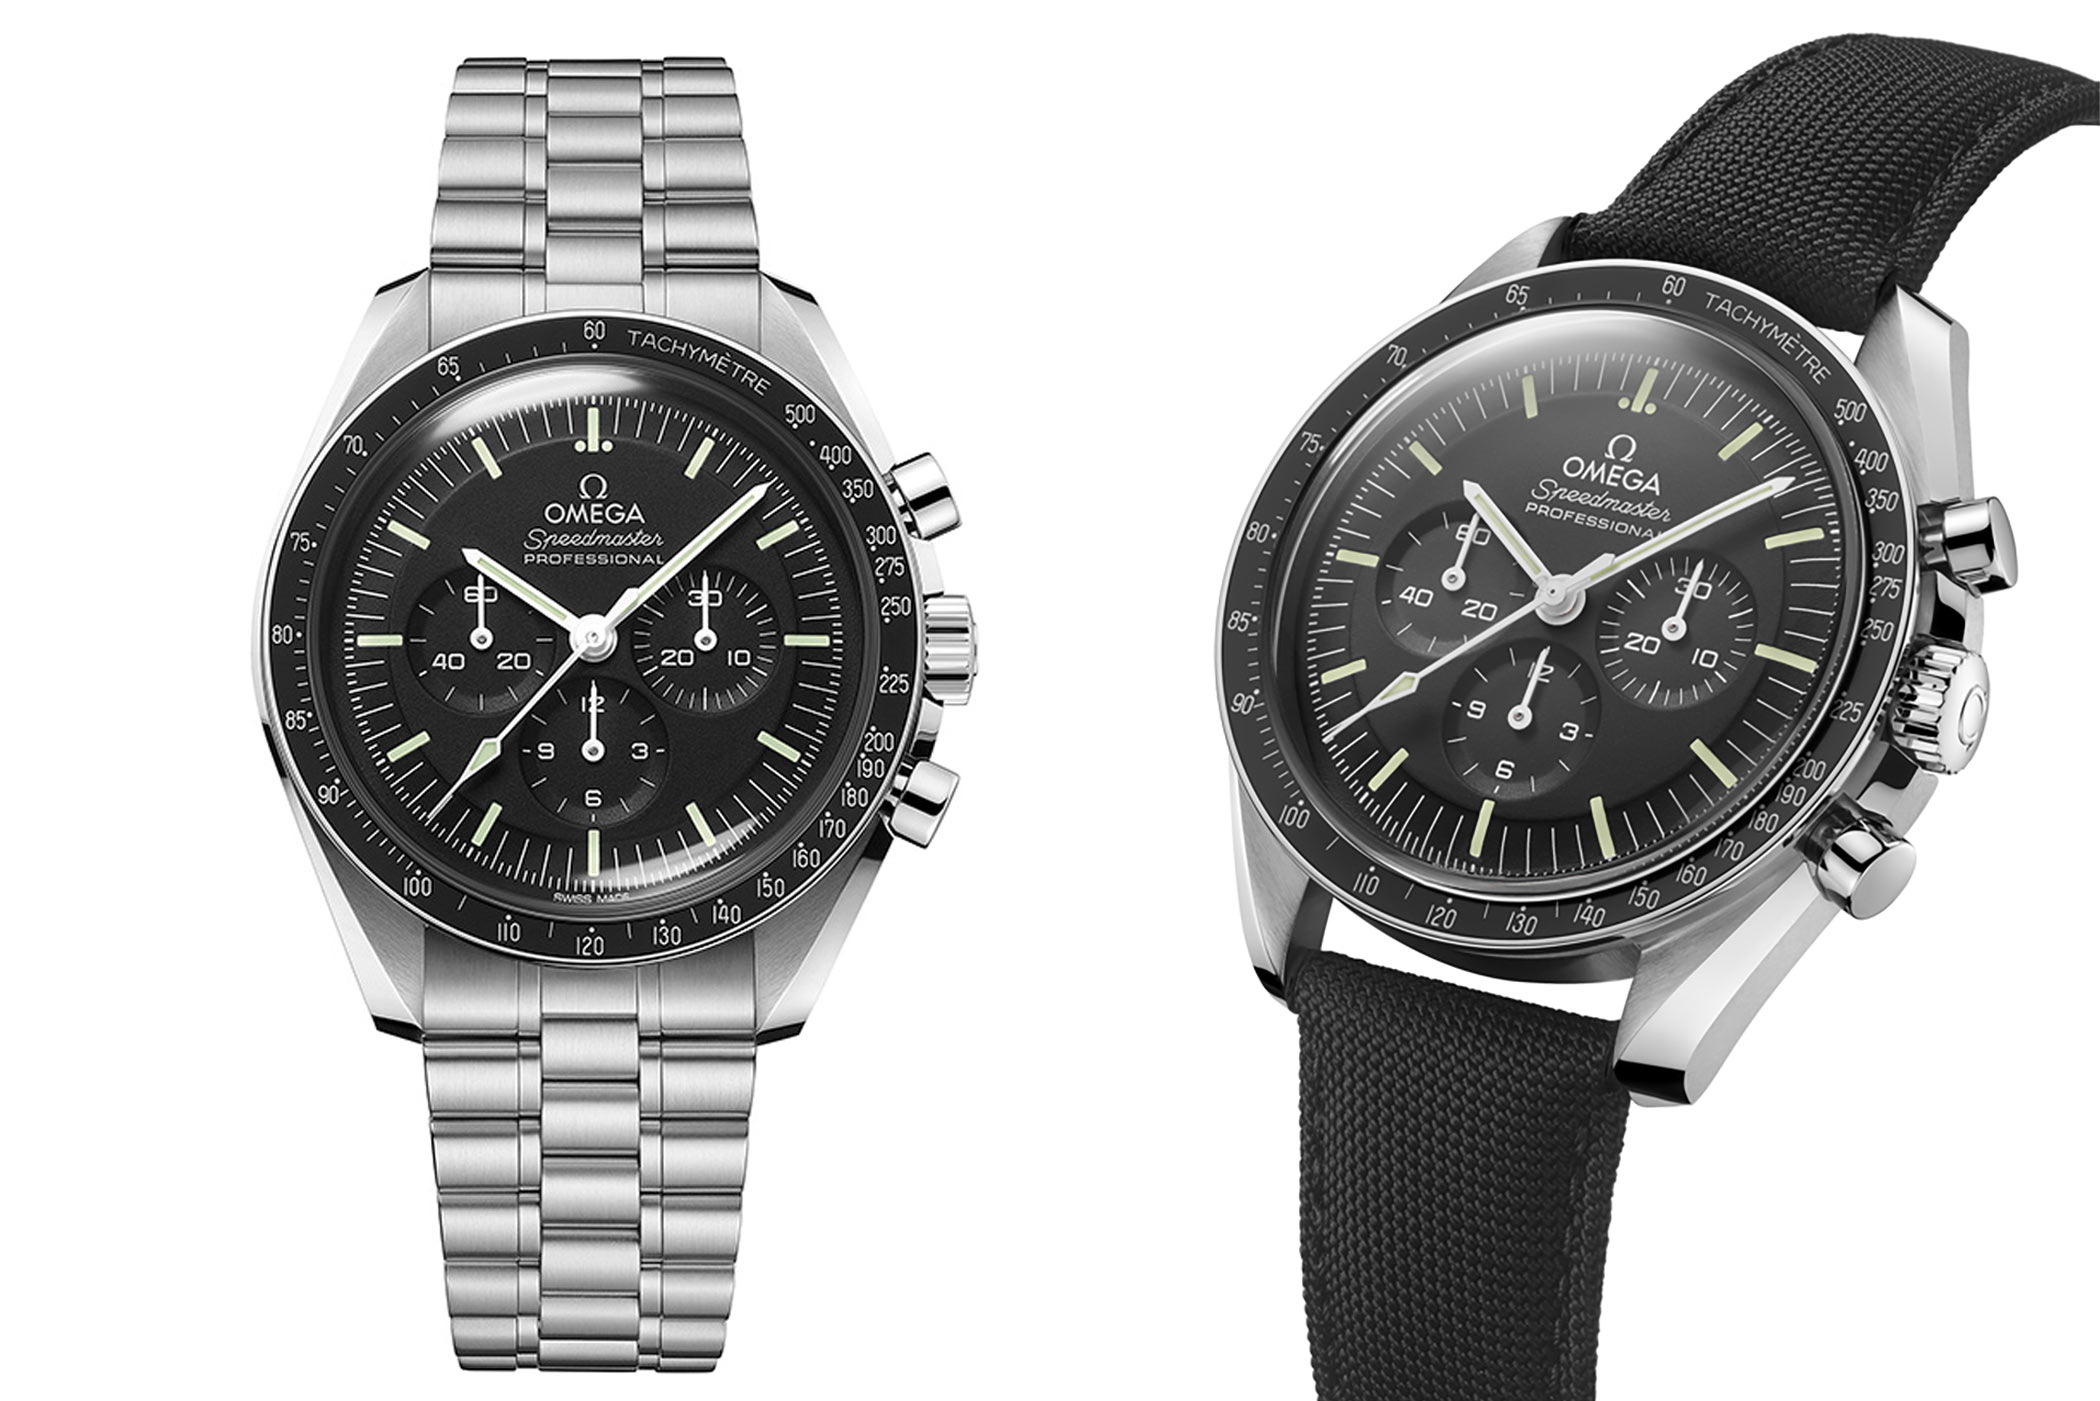 Omega Speedmaster Professional Moonwatch for $6,737 for sale from a Private  Seller on Chrono24